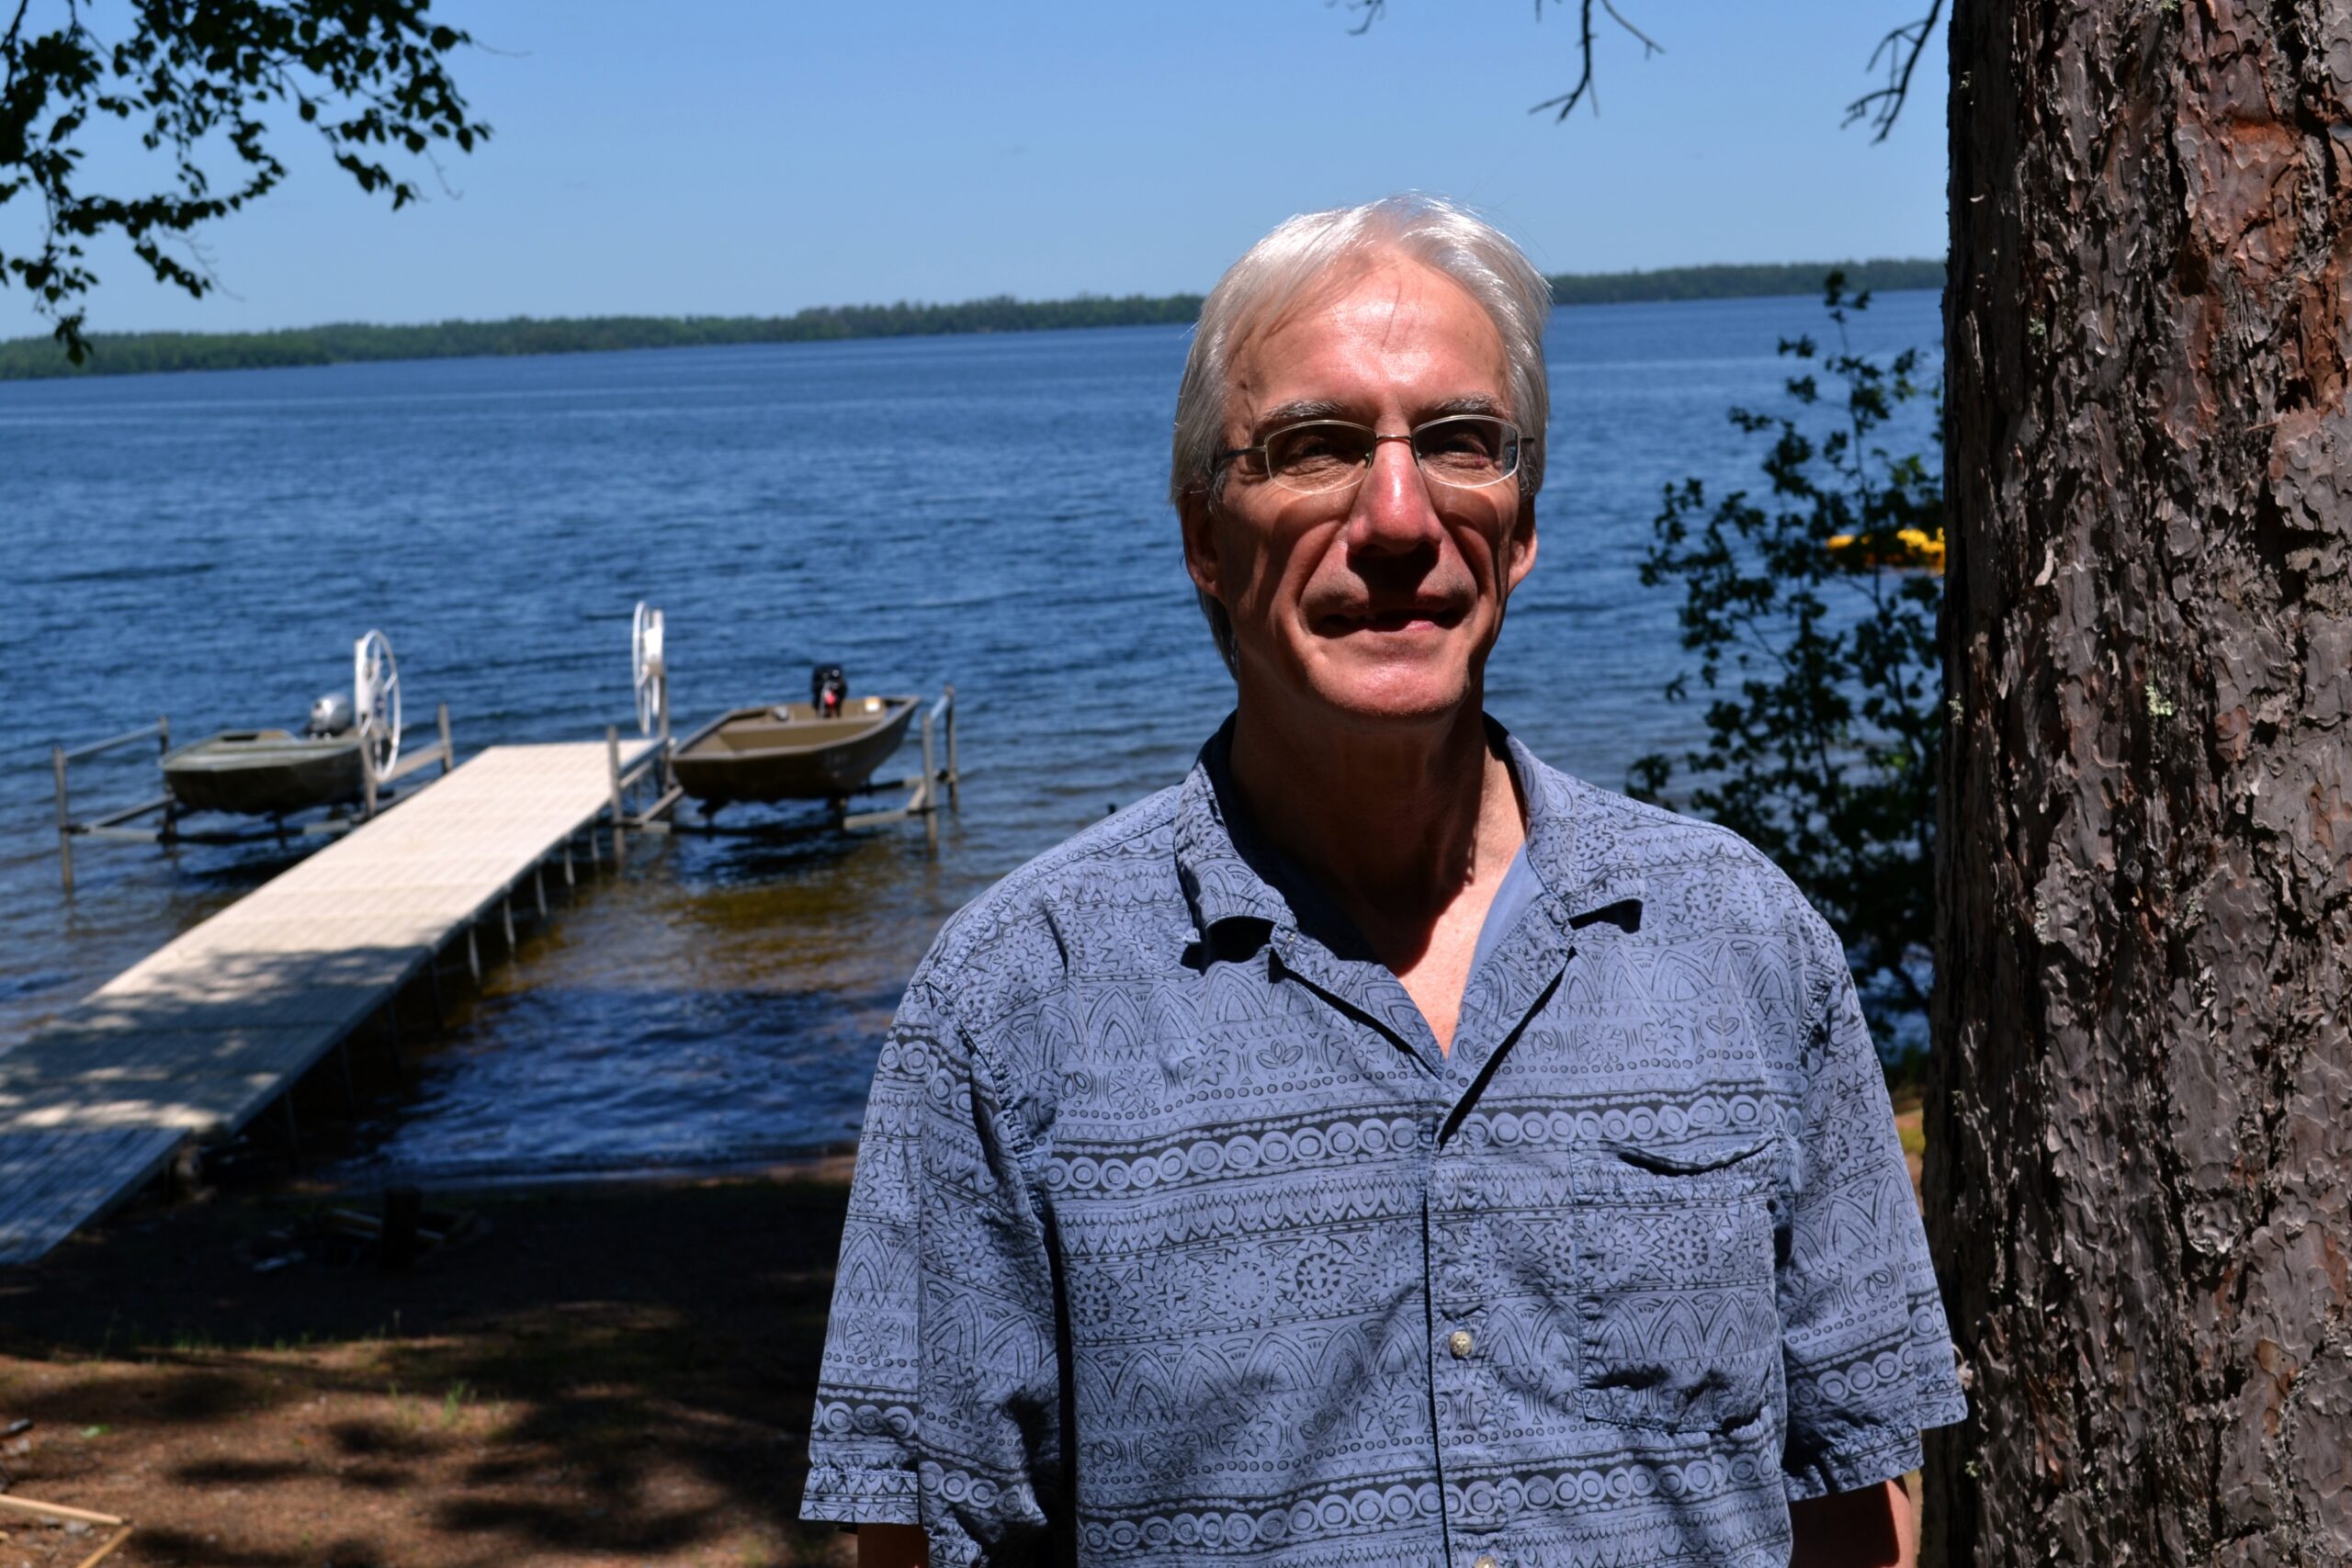 Researchers Investigate Longterm Drop In Northern Wisconsin Lake Water Levels